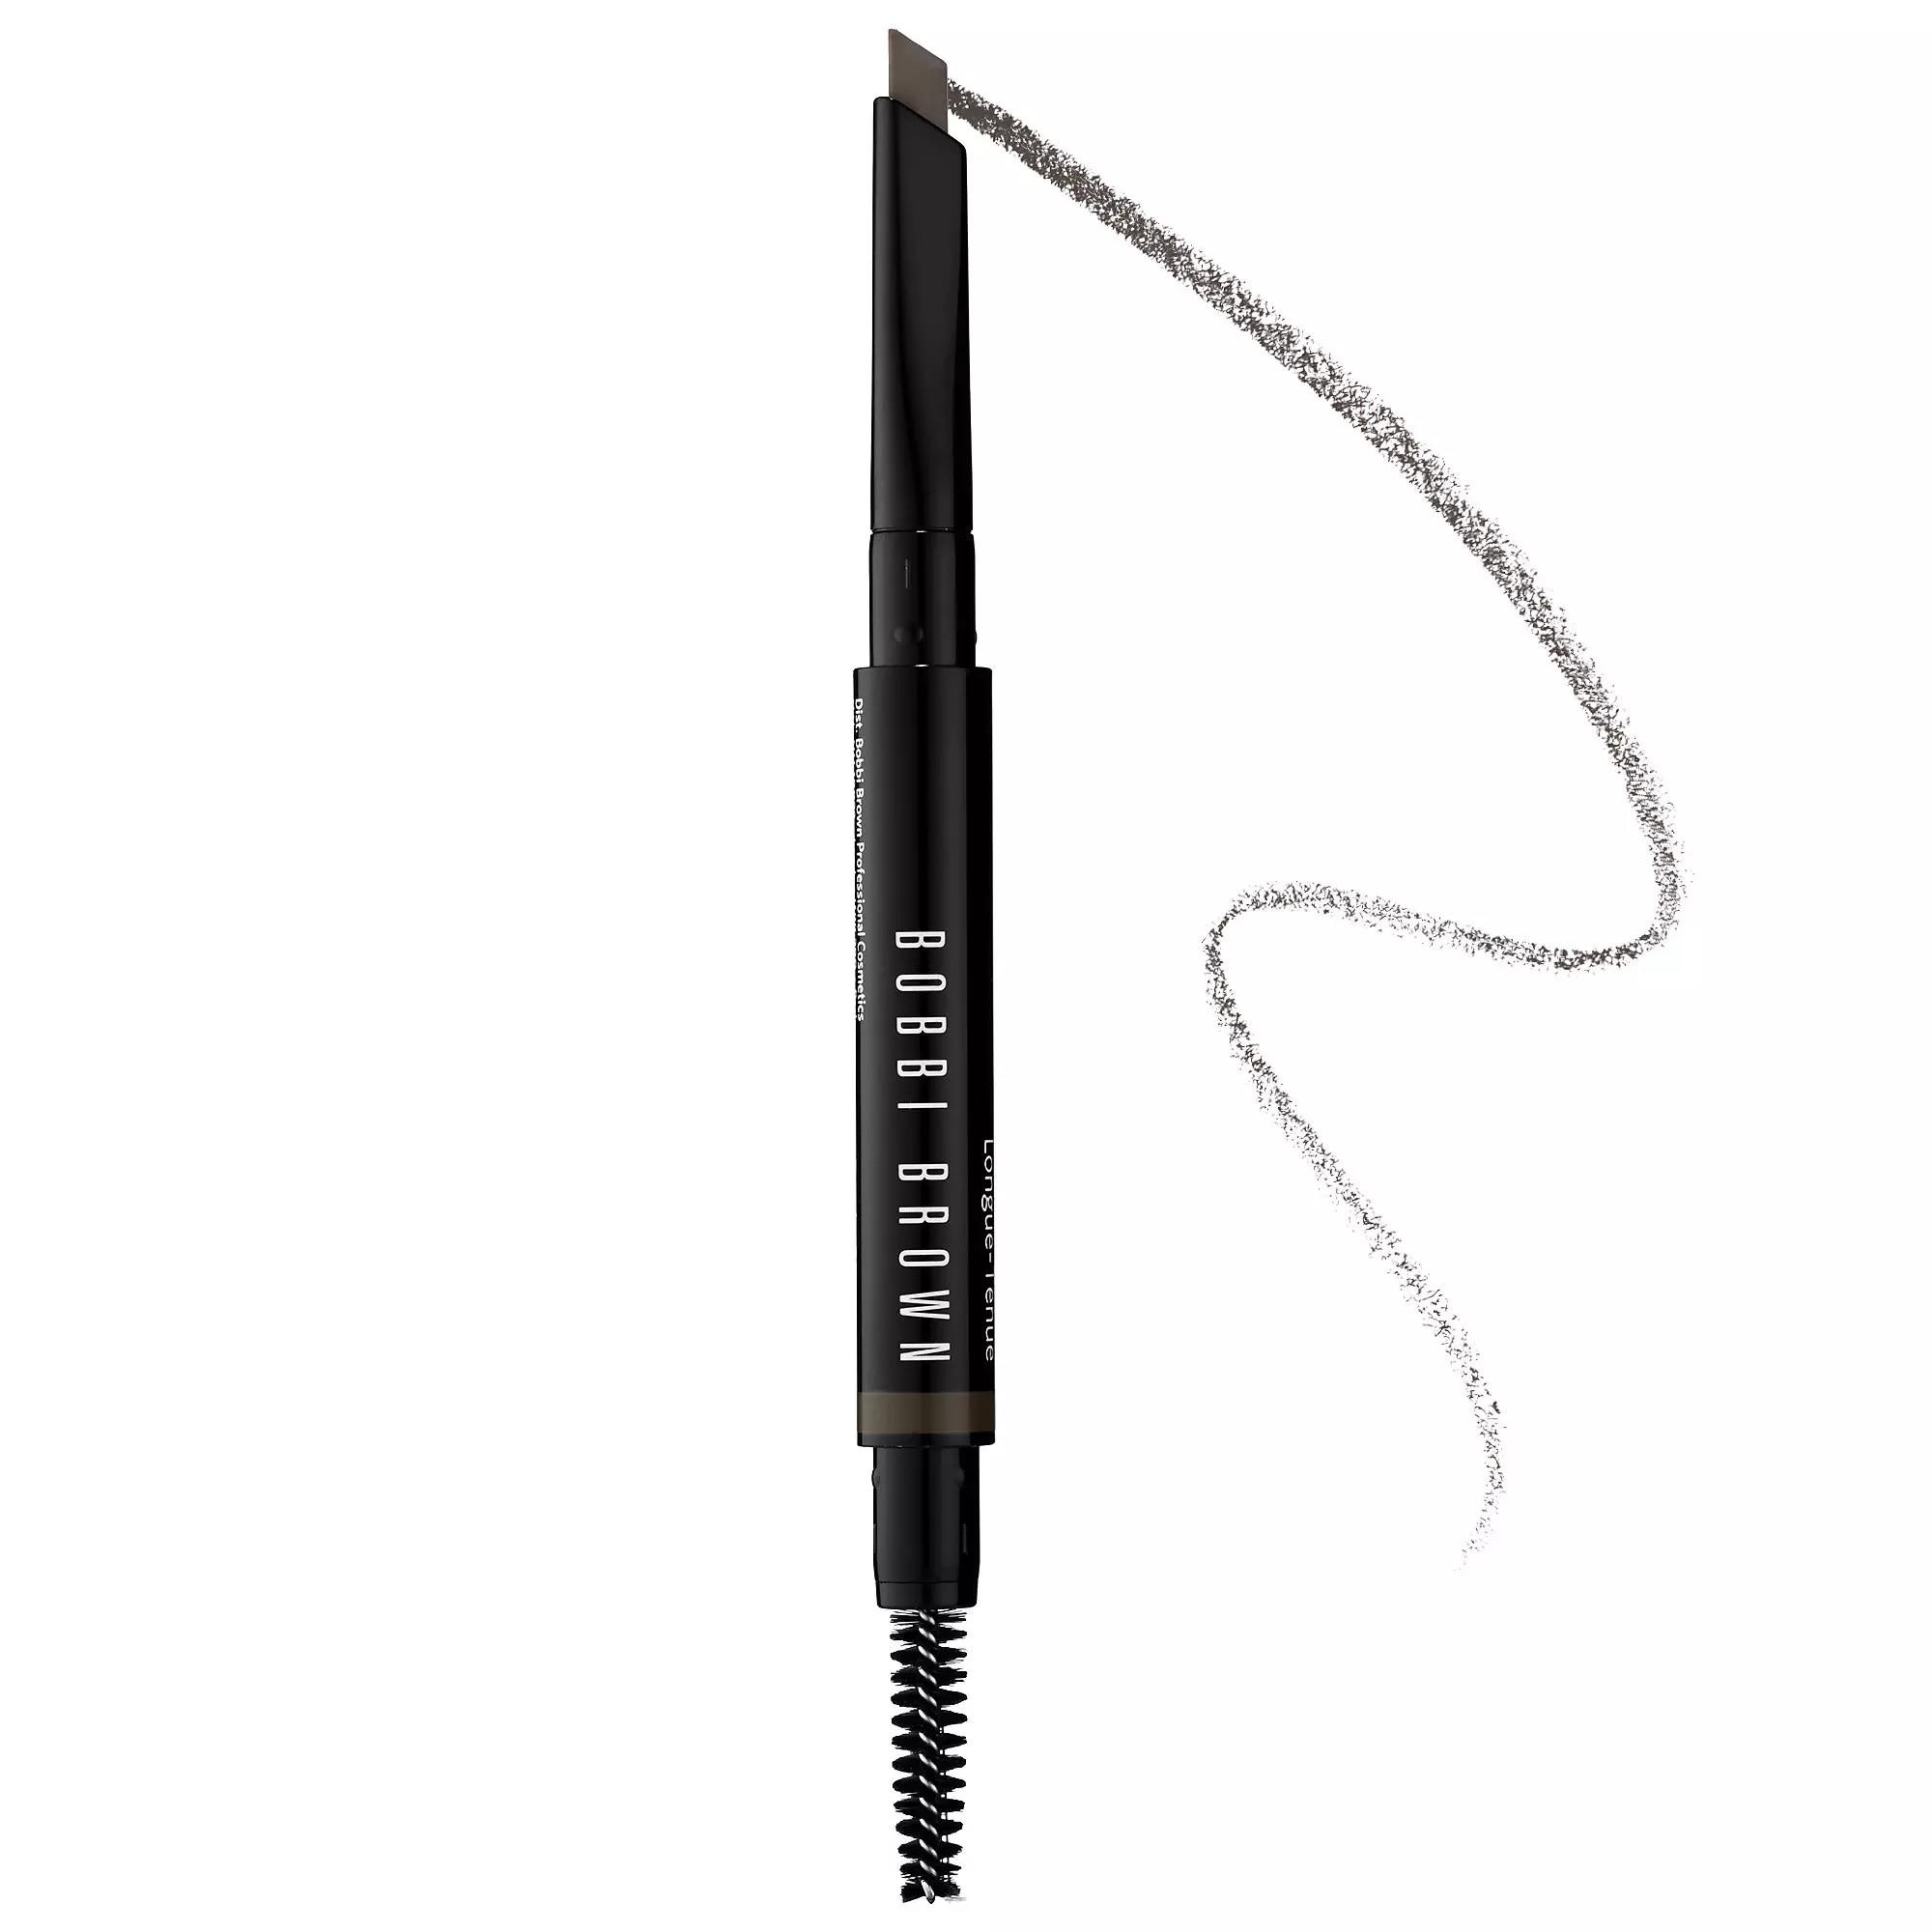  Bobbi Brown Perfectly Defined Long-Wear Brow Pencil Rich Brown